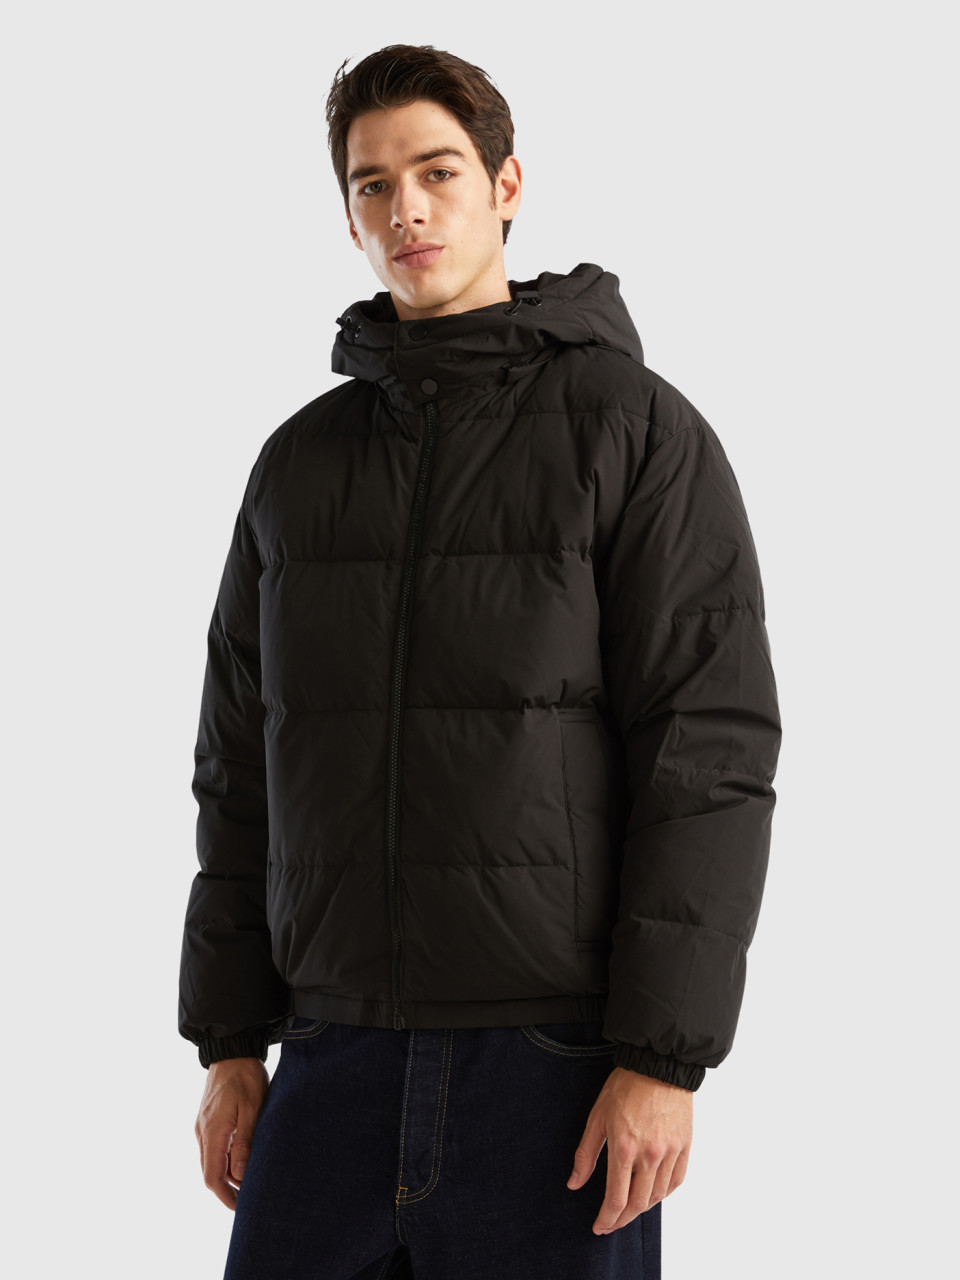 Benetton, Padded Jacket With Removable Hood, Black, Men